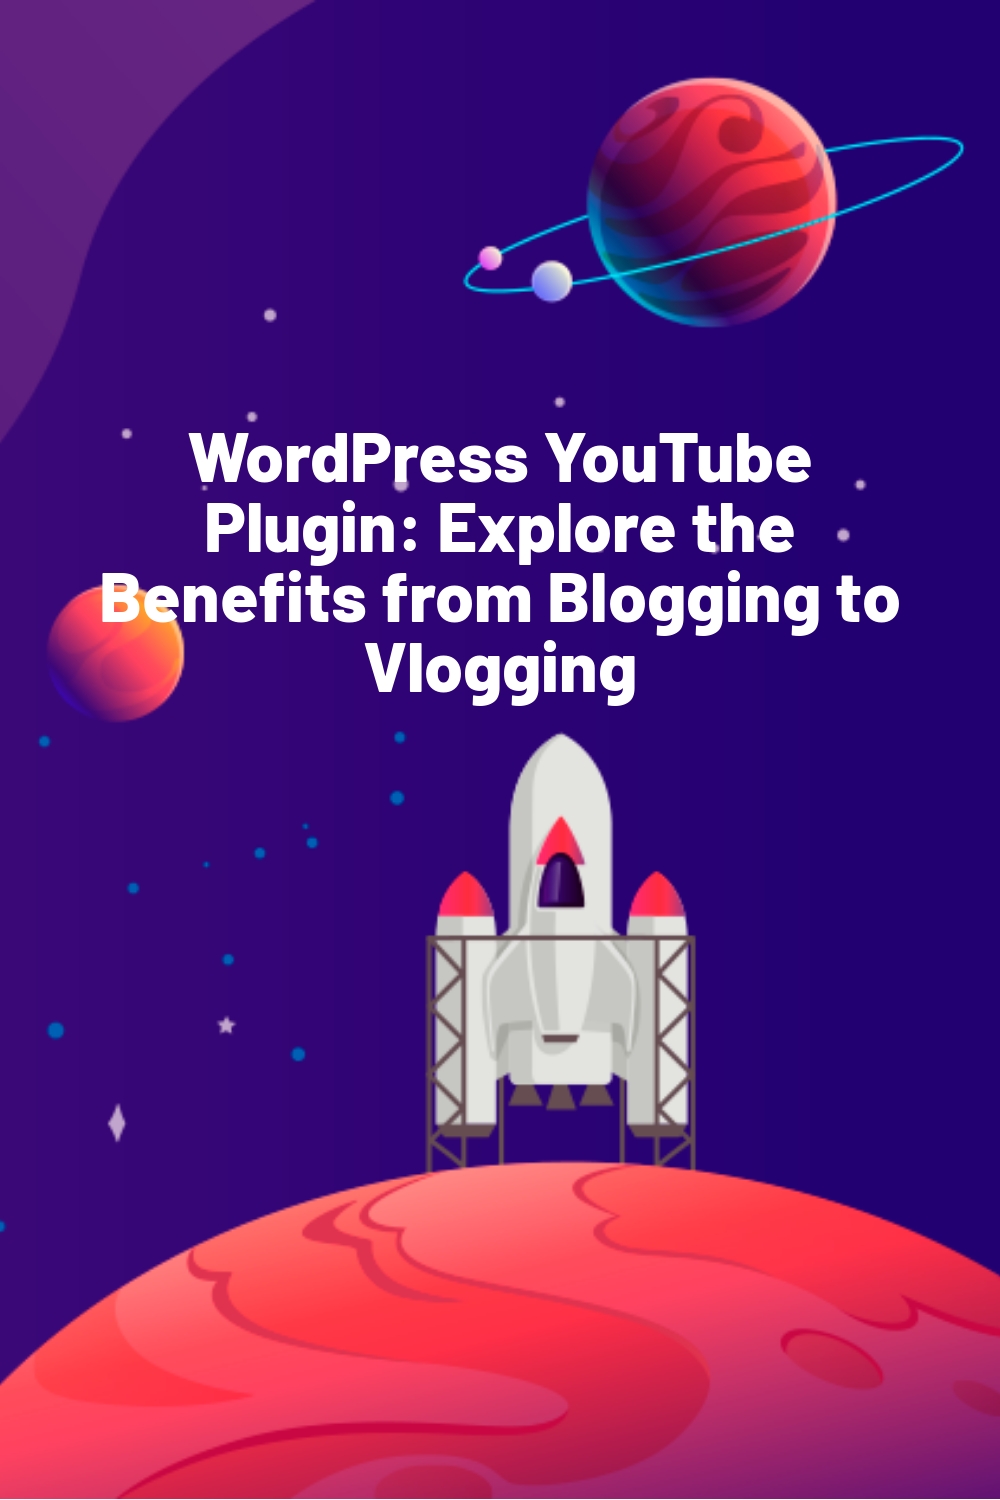 WordPress YouTube Plugin: Explore the Benefits from Blogging to Vlogging